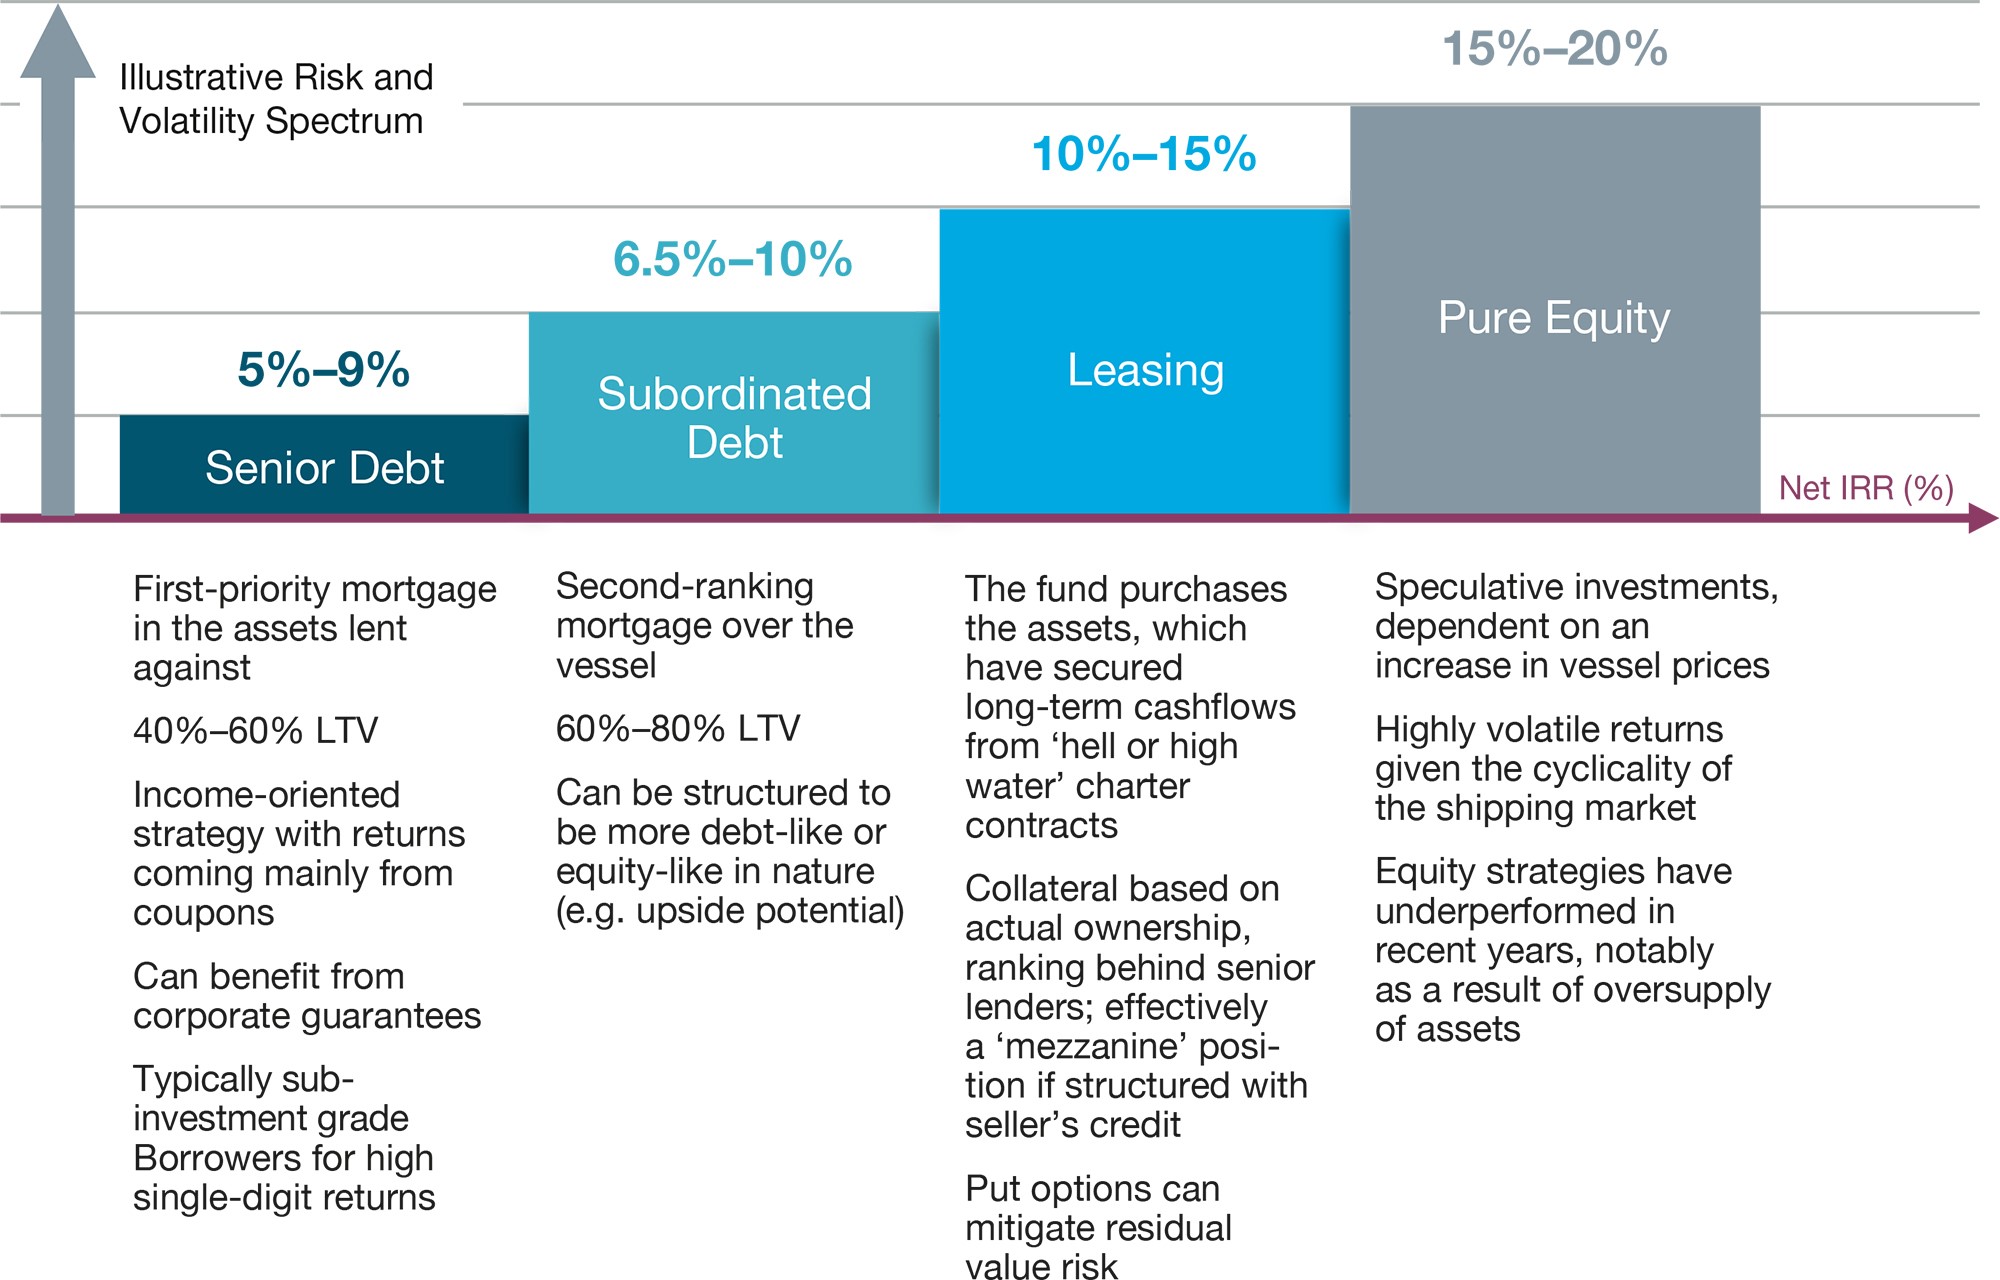 LEASING CAN OFFER ATTRACTIVE RISK-ADJUSTED RETURNS